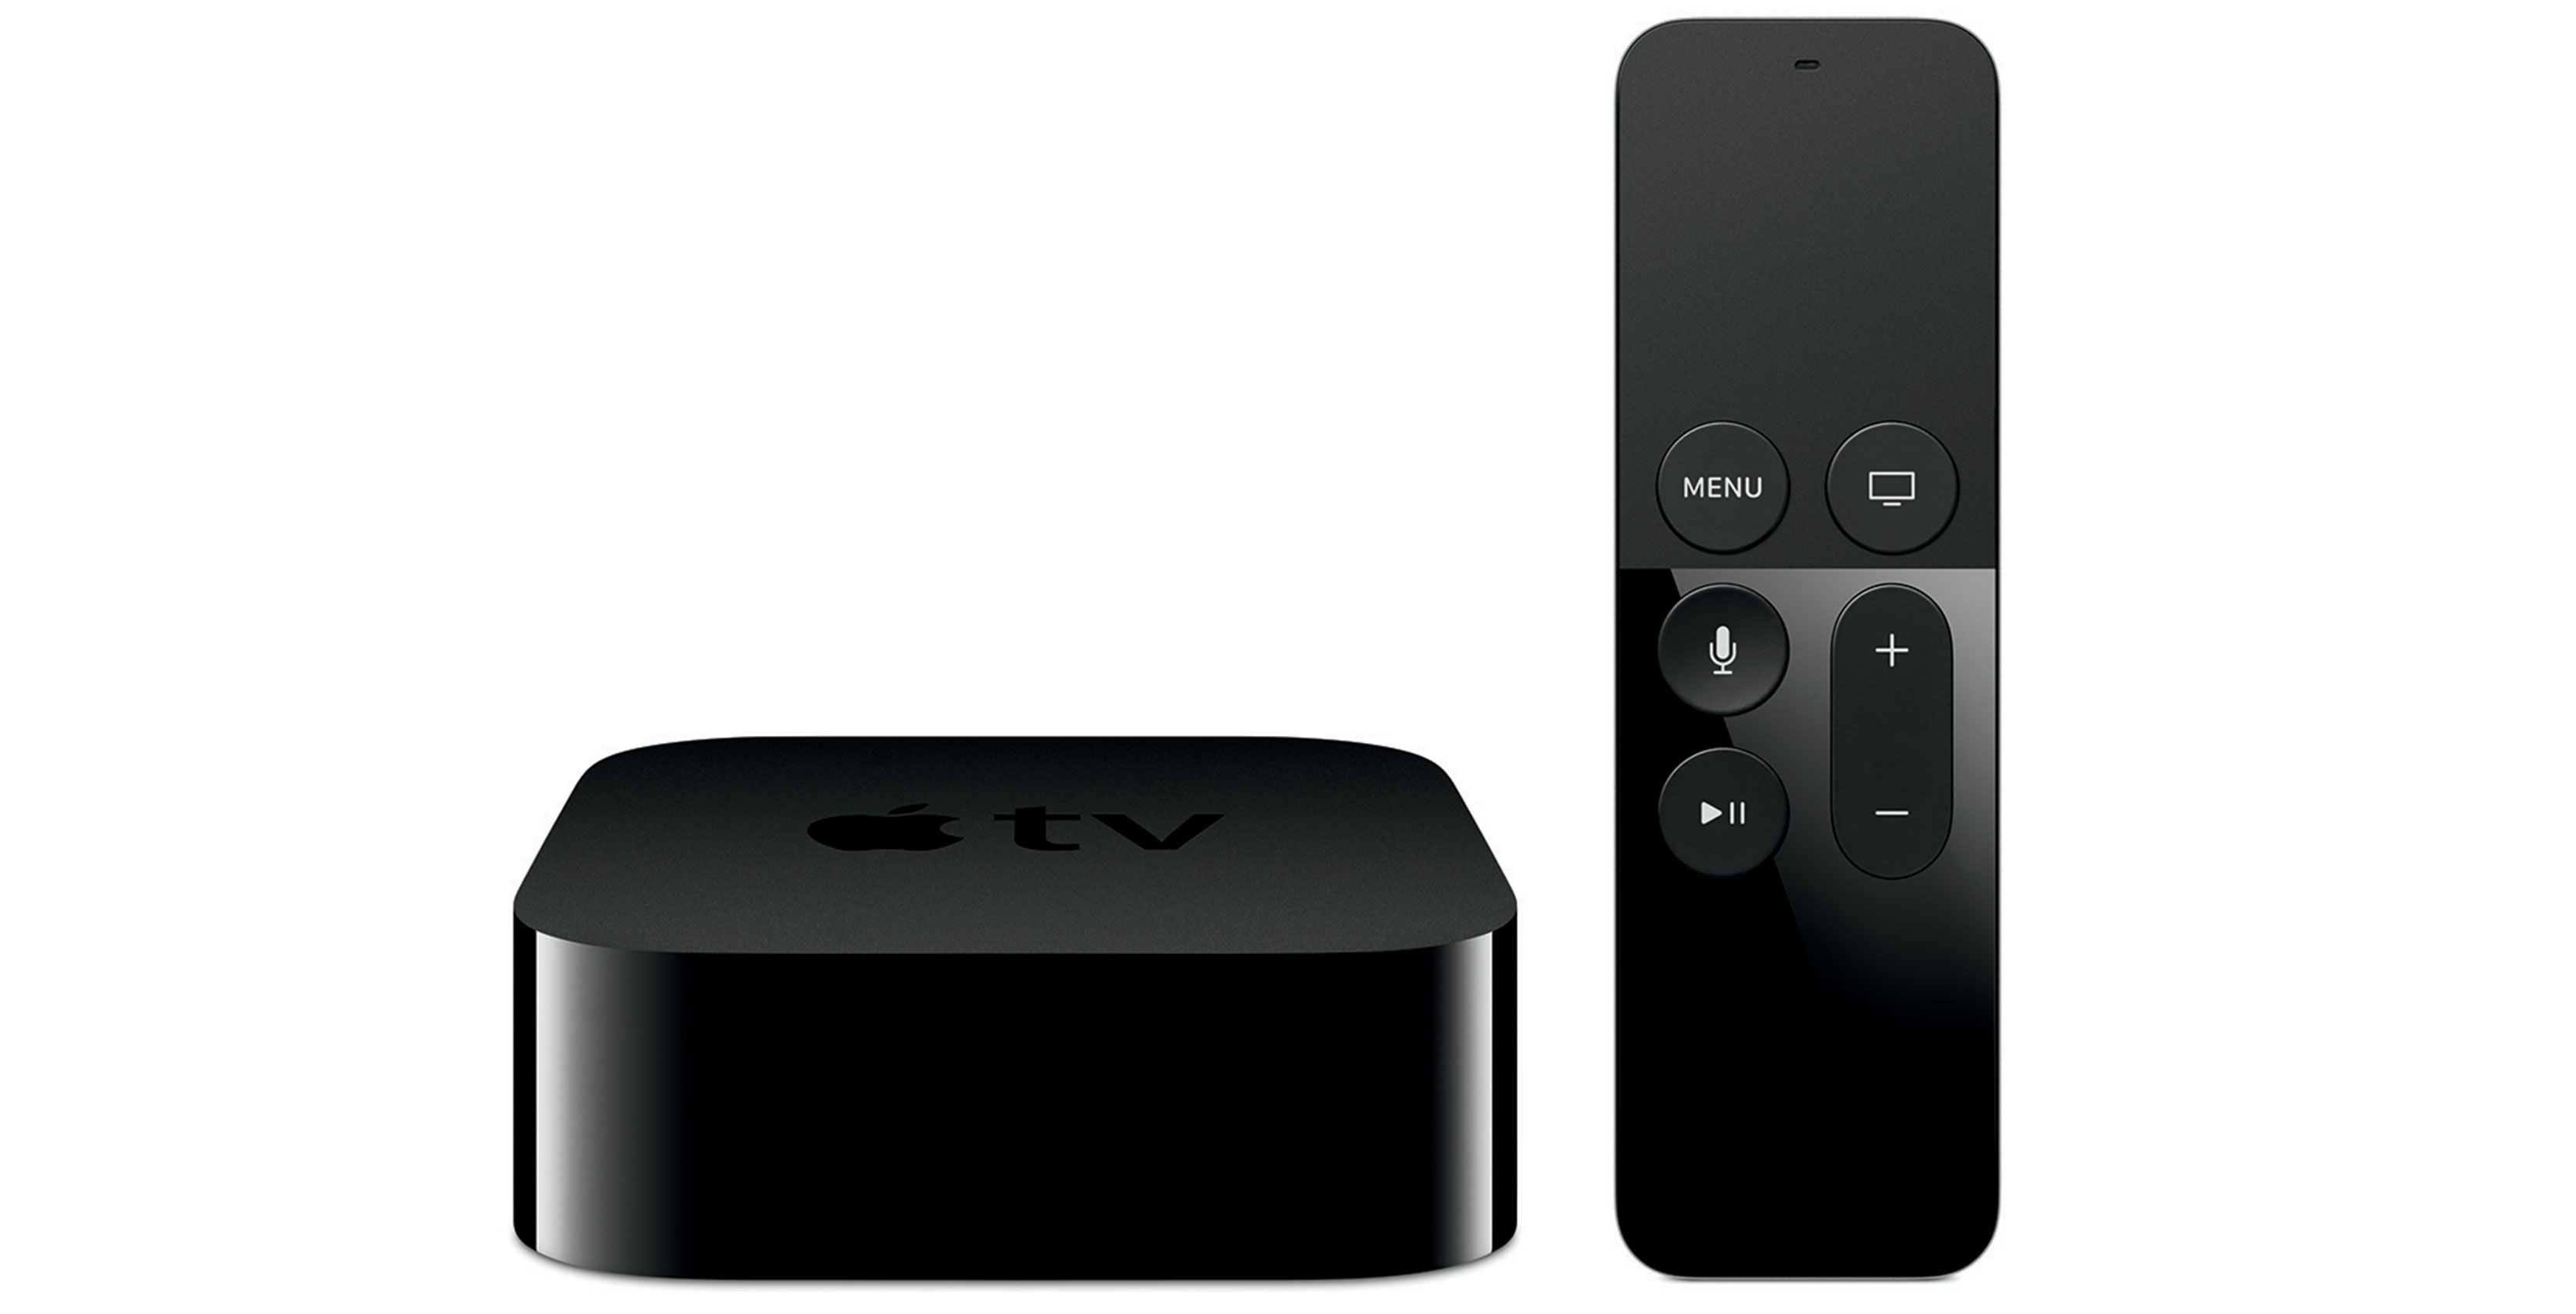 Render of the 4th generation Apple TV